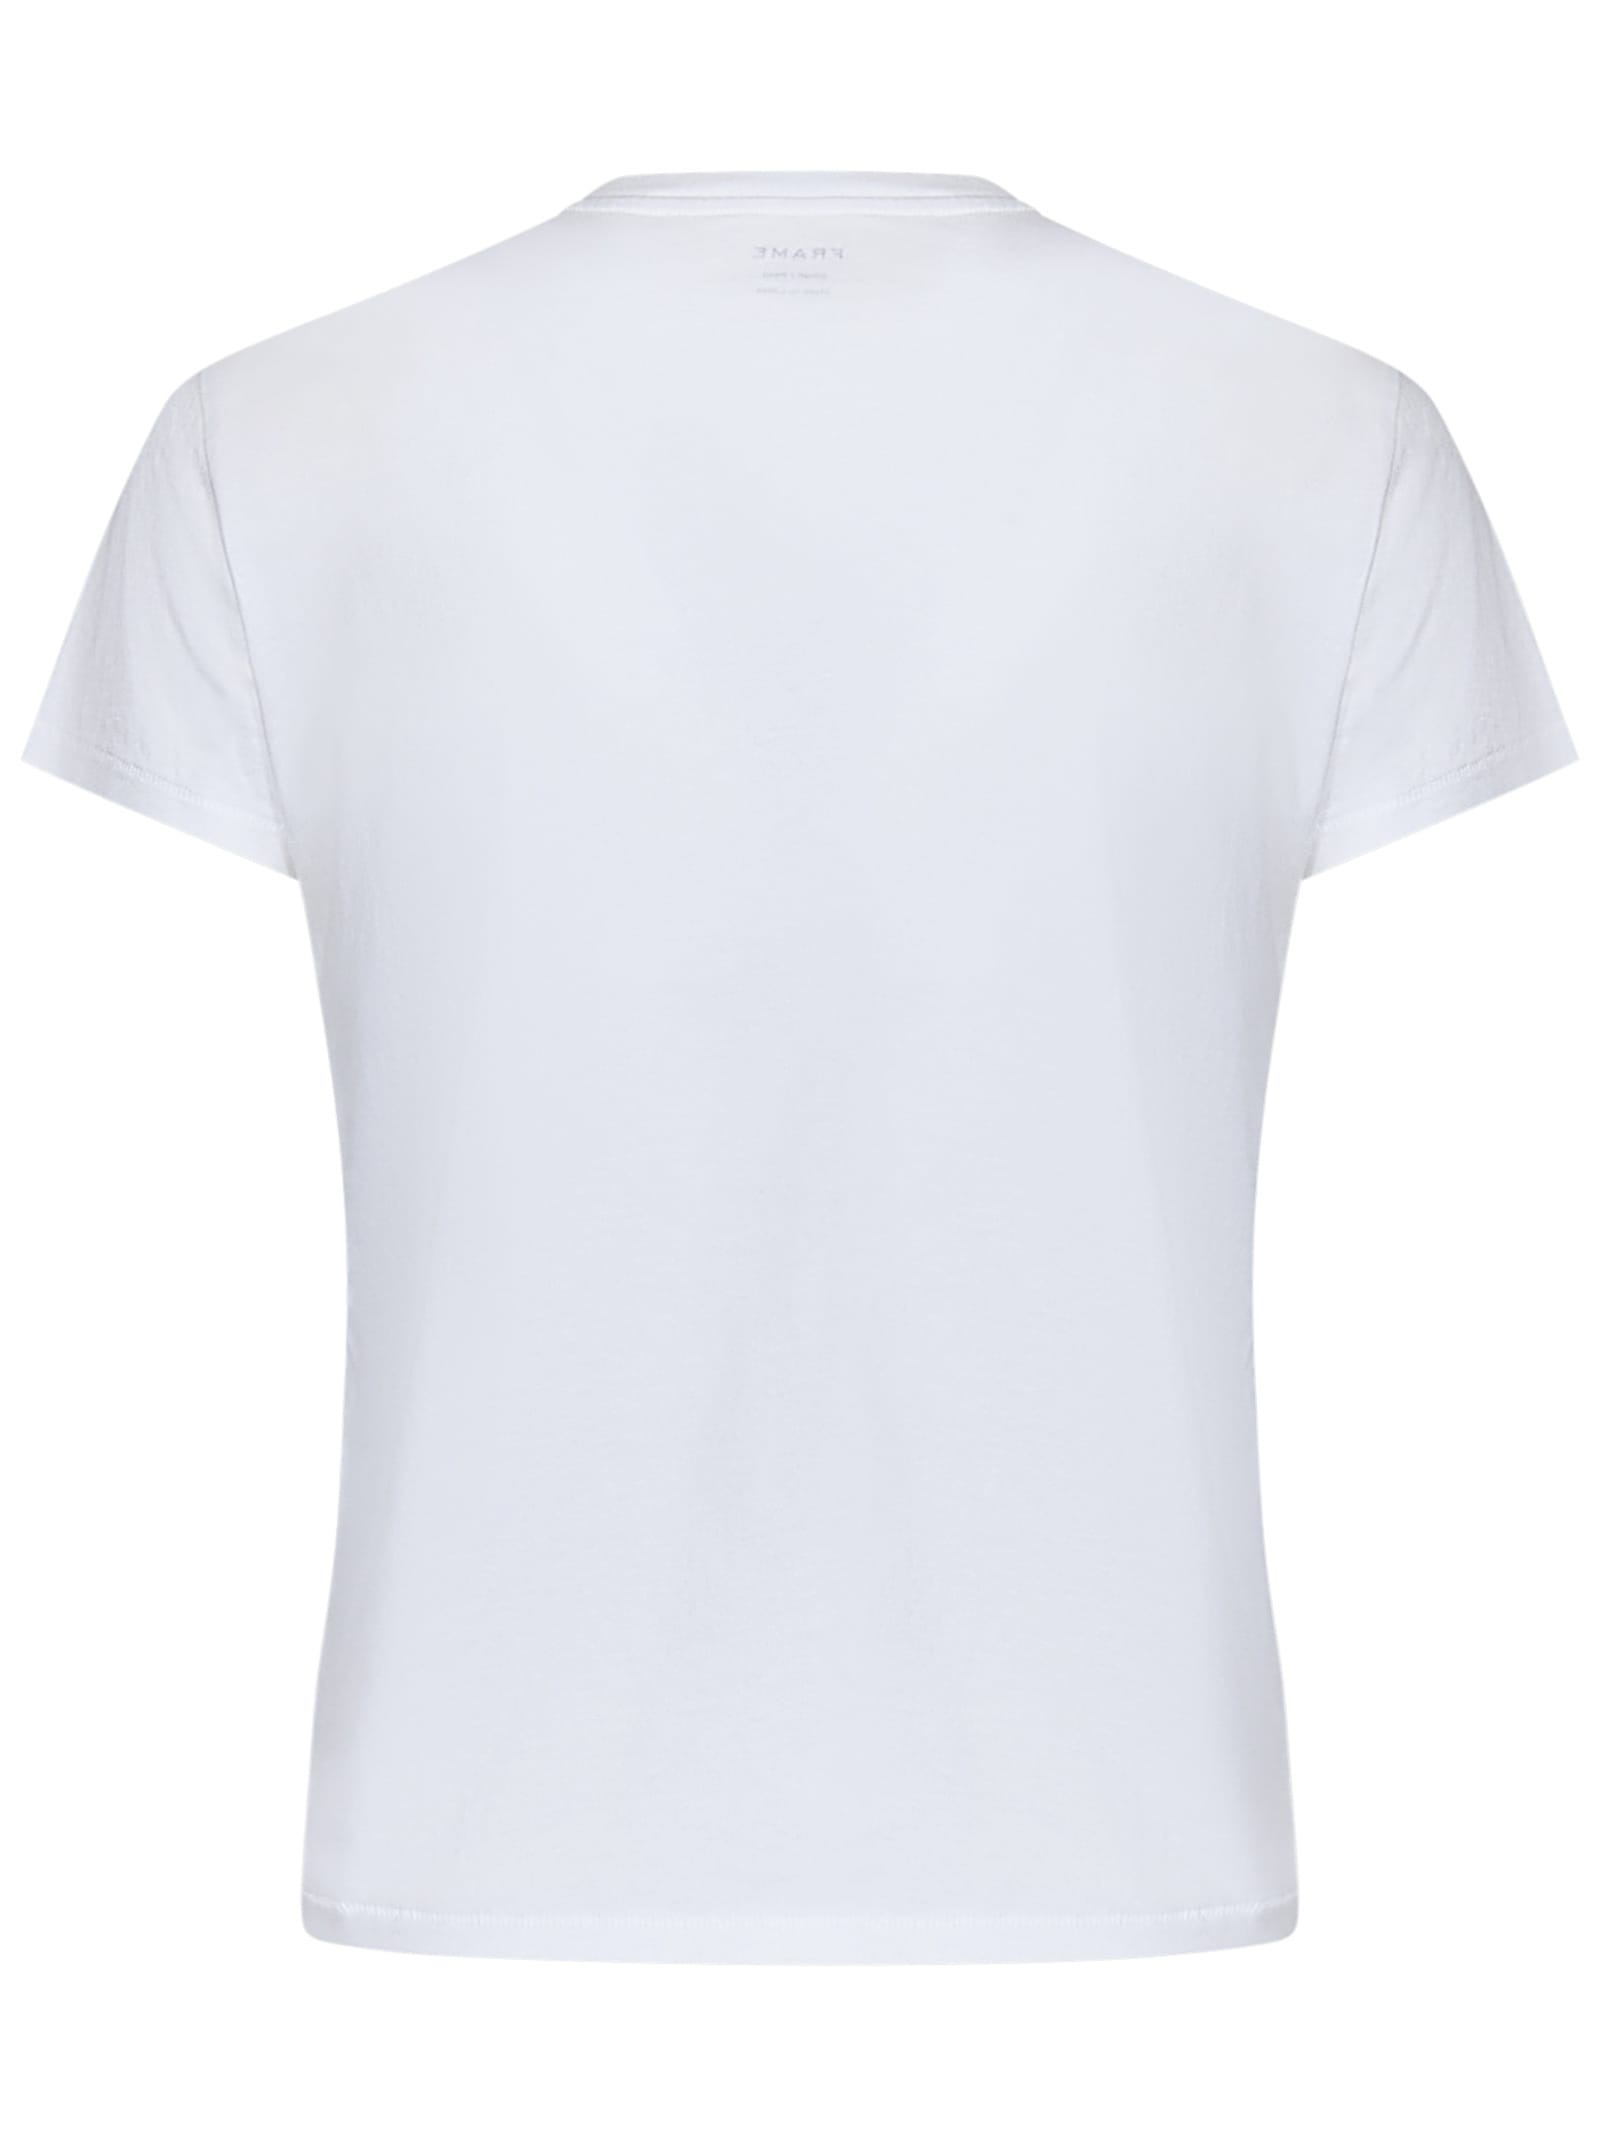 Shop Frame Baby Tee T-shirt In Wht White